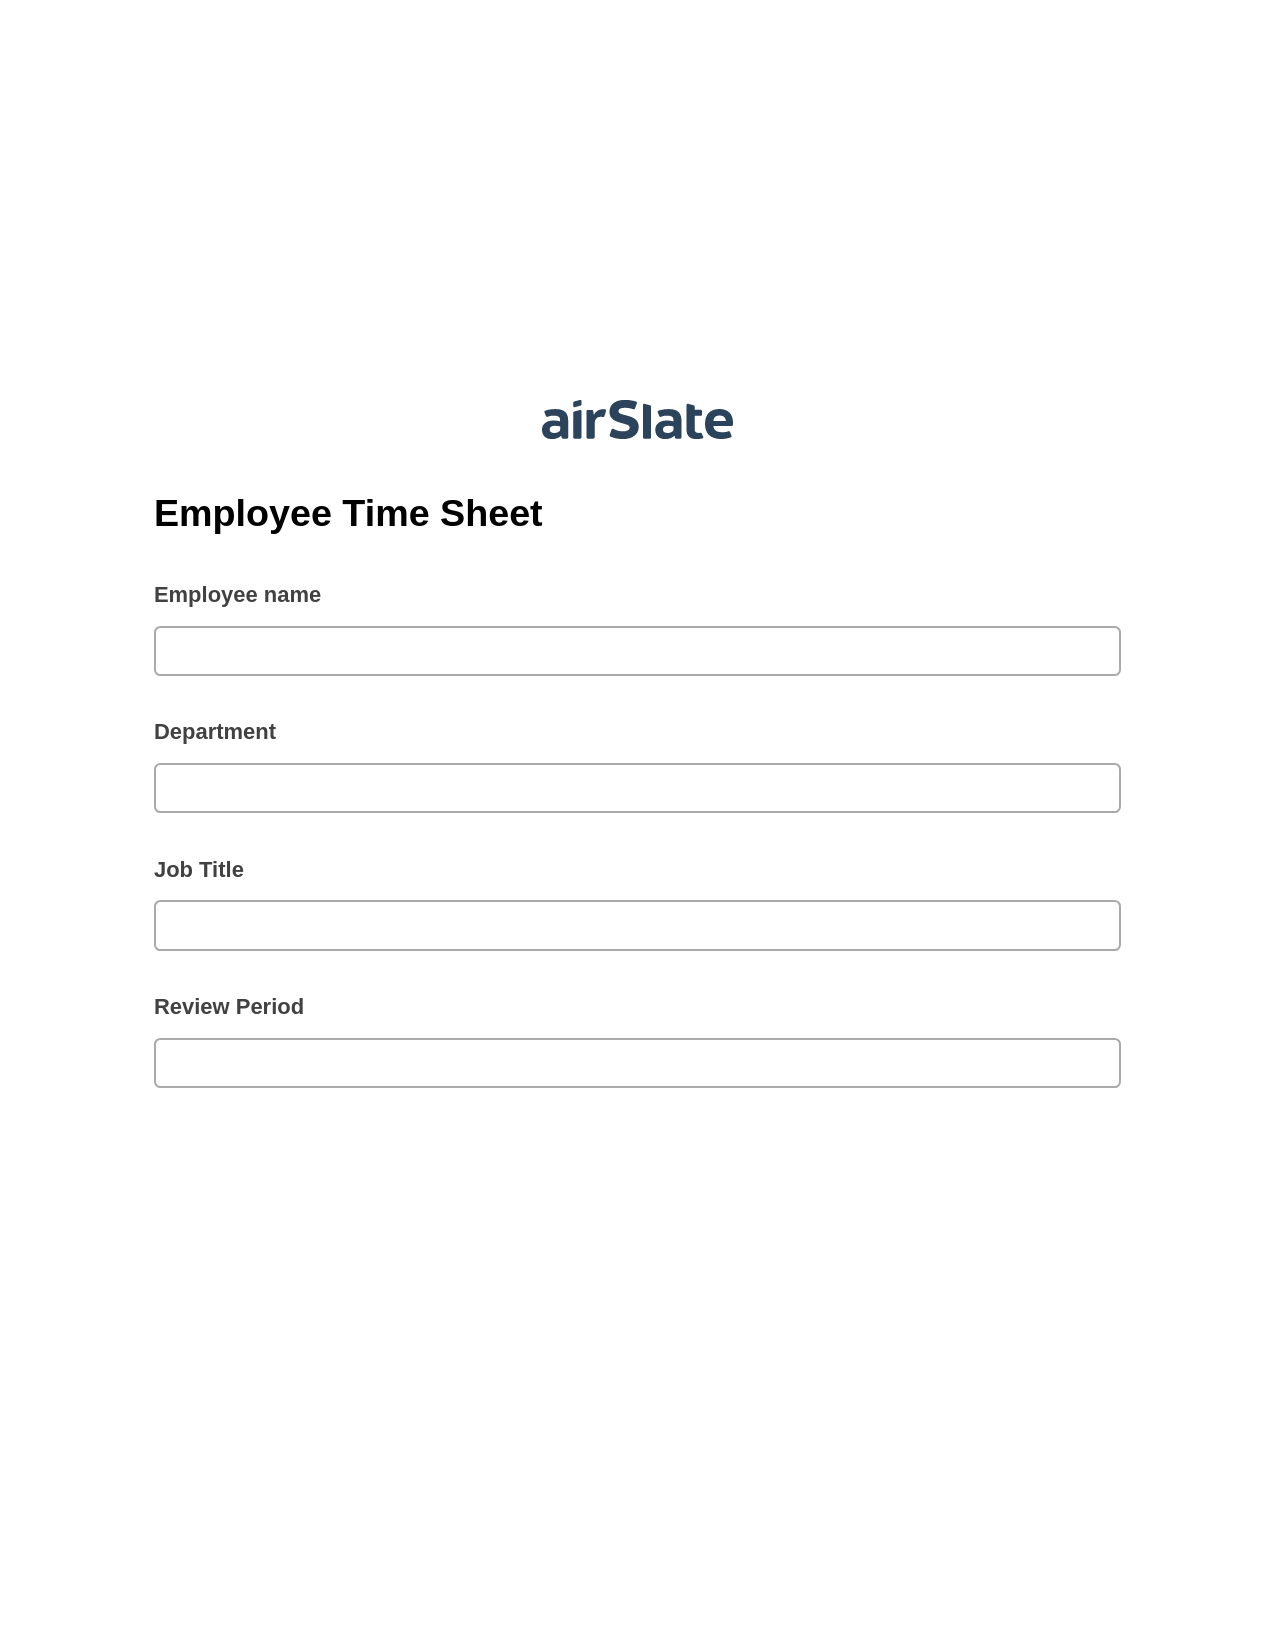 Multirole Employee Time Sheet Pre-fill from MS Dynamics 365 Records, Create slate addon, Archive to Google Drive Bot